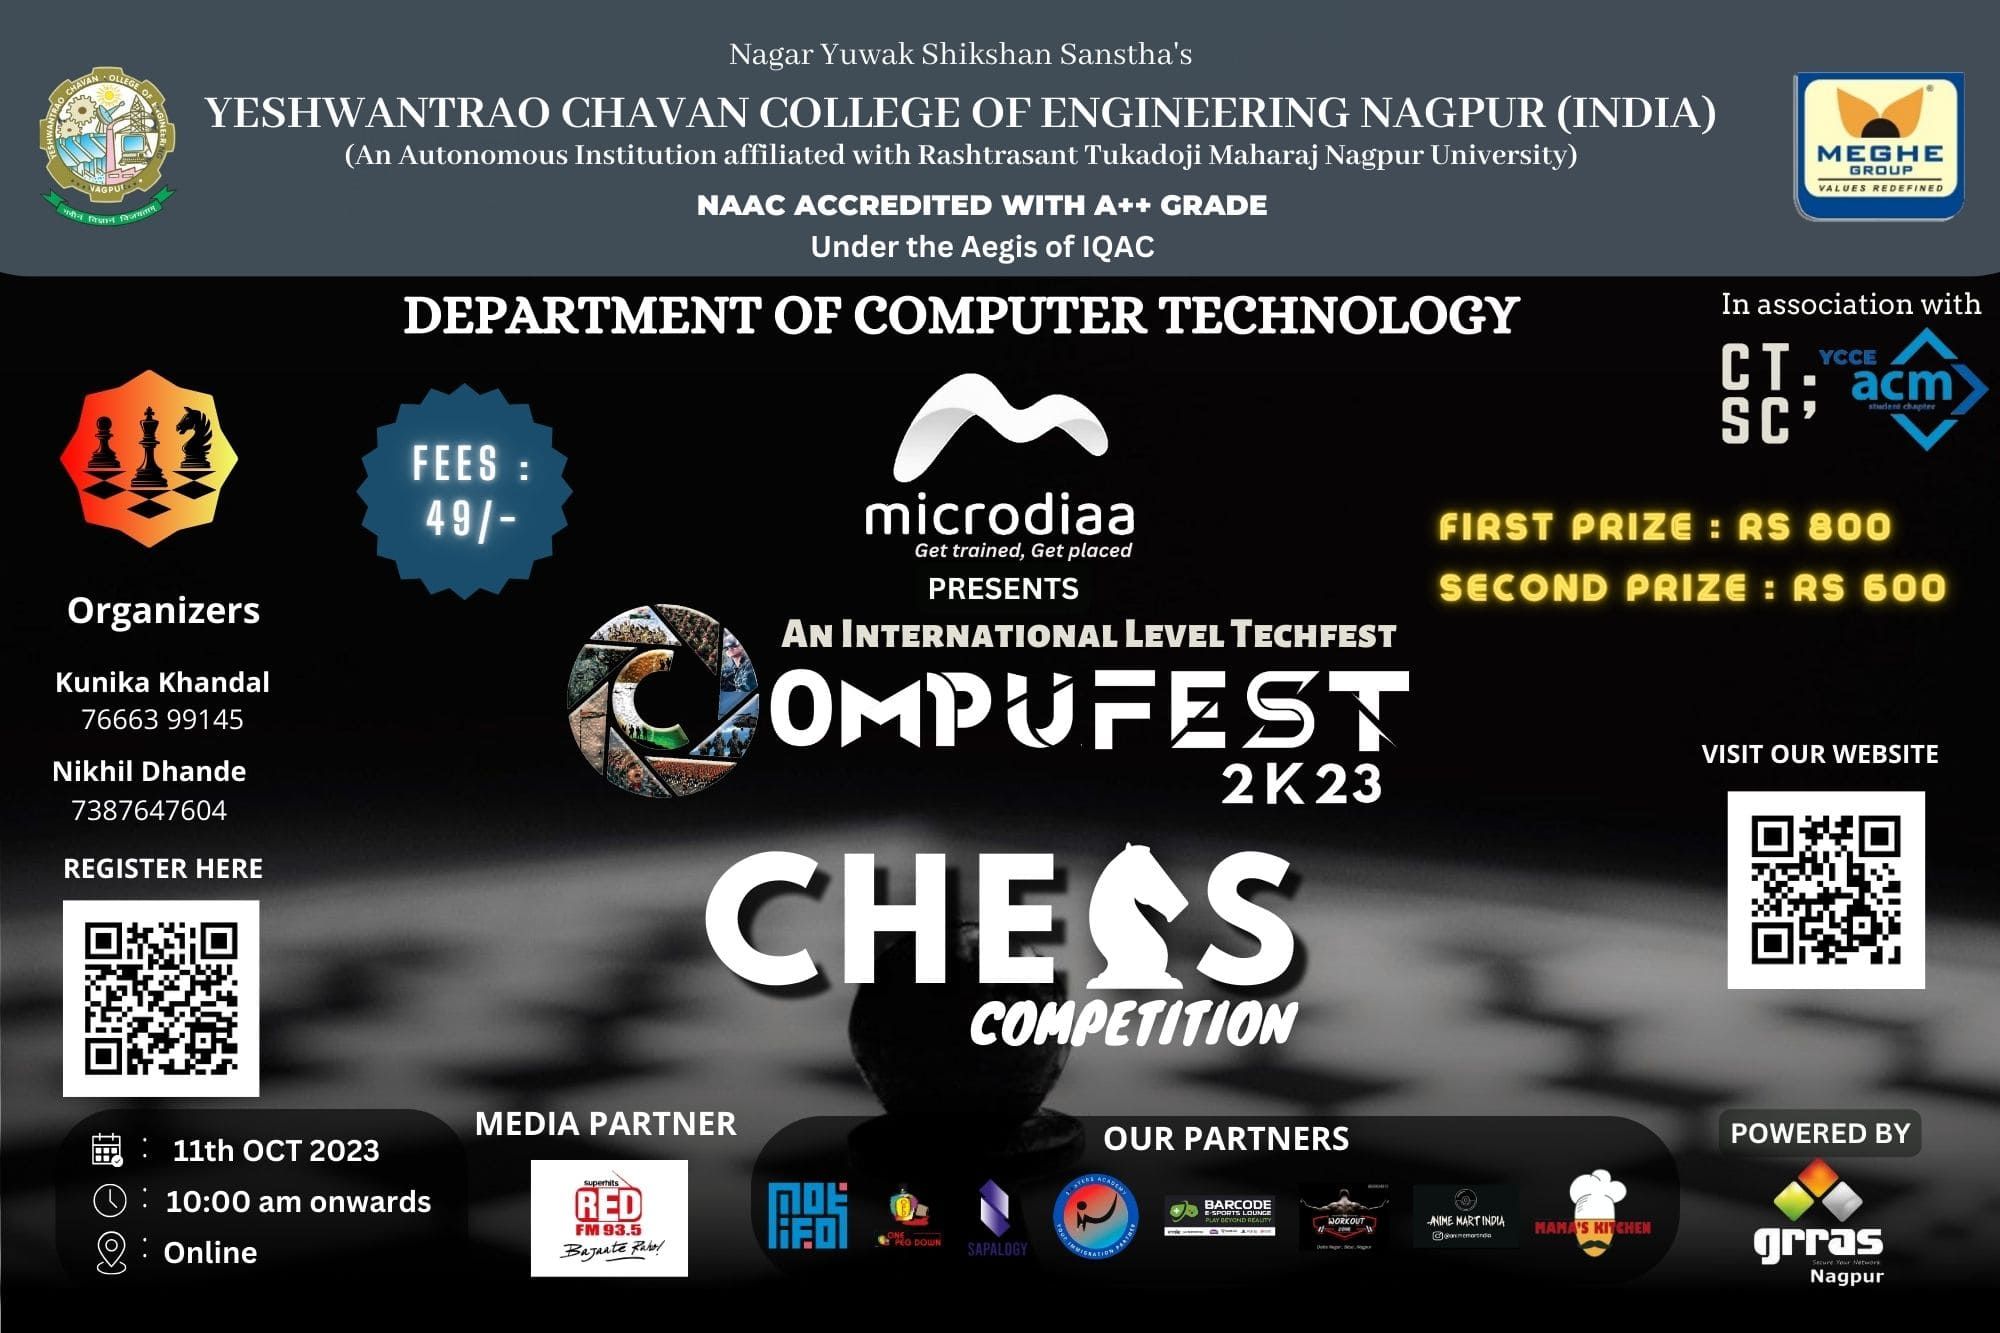 Event 01 - Chess